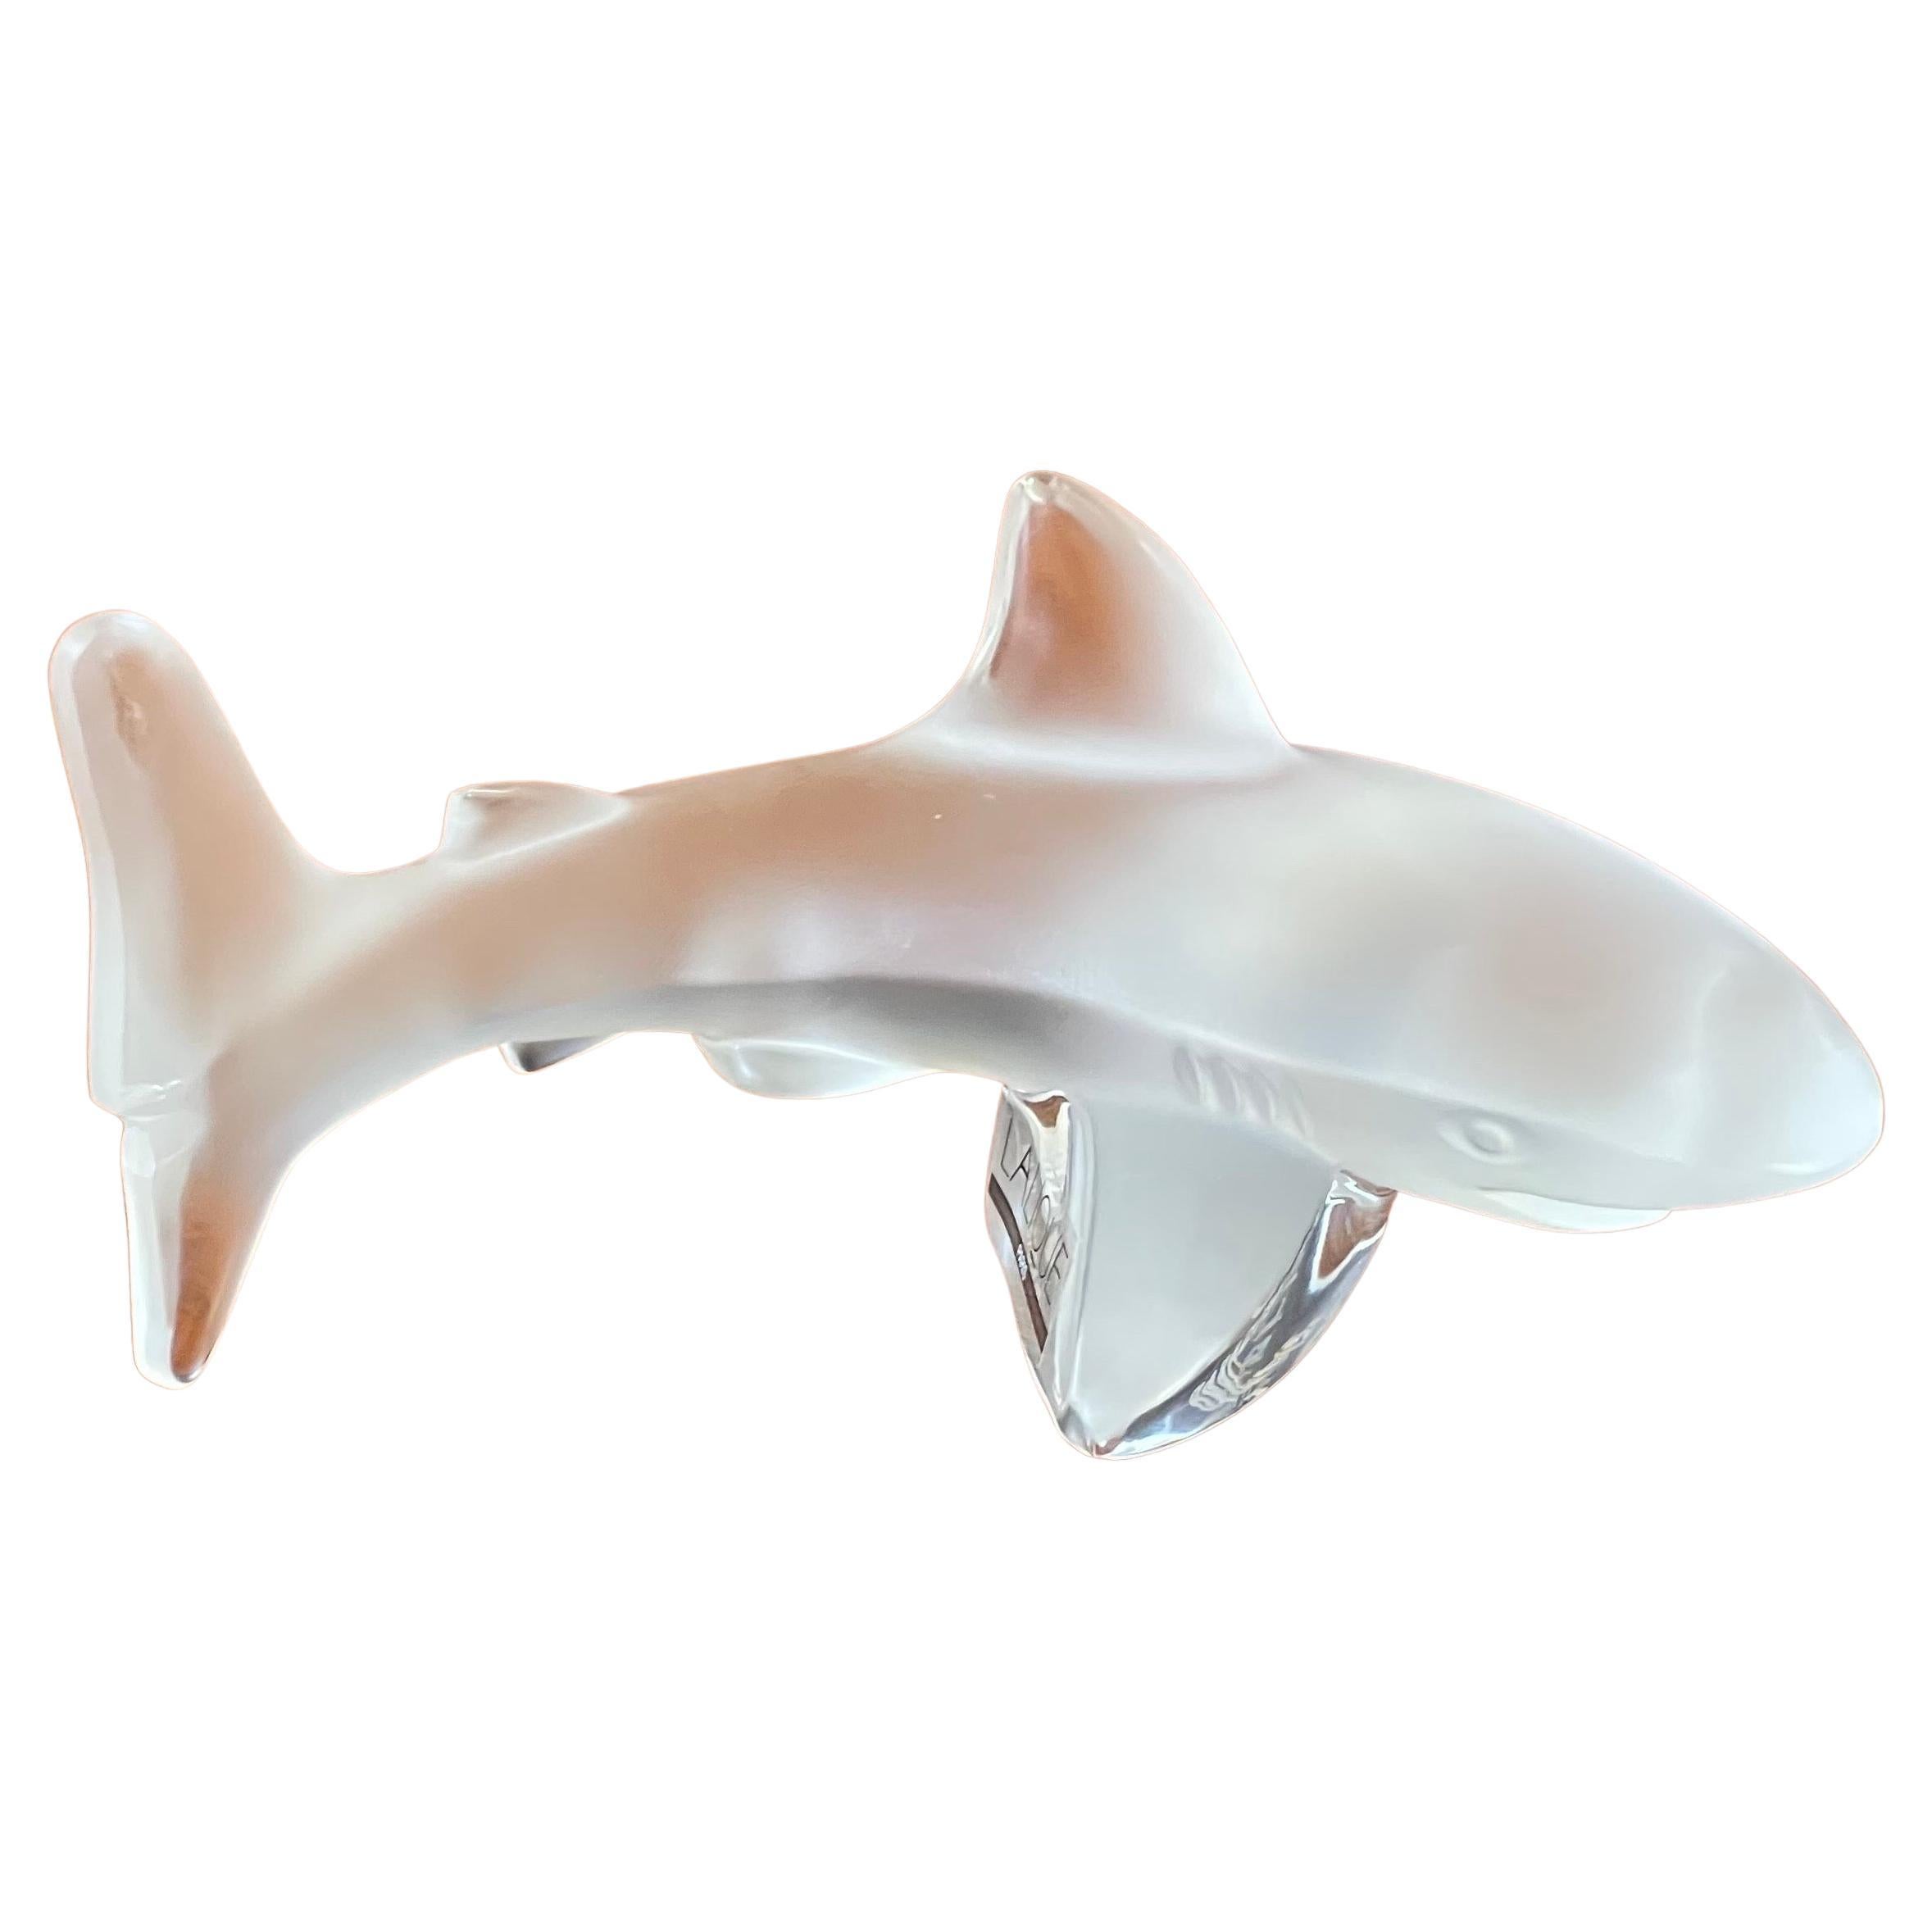 Frosted Crystal Shark Sculpture by Lalique of France